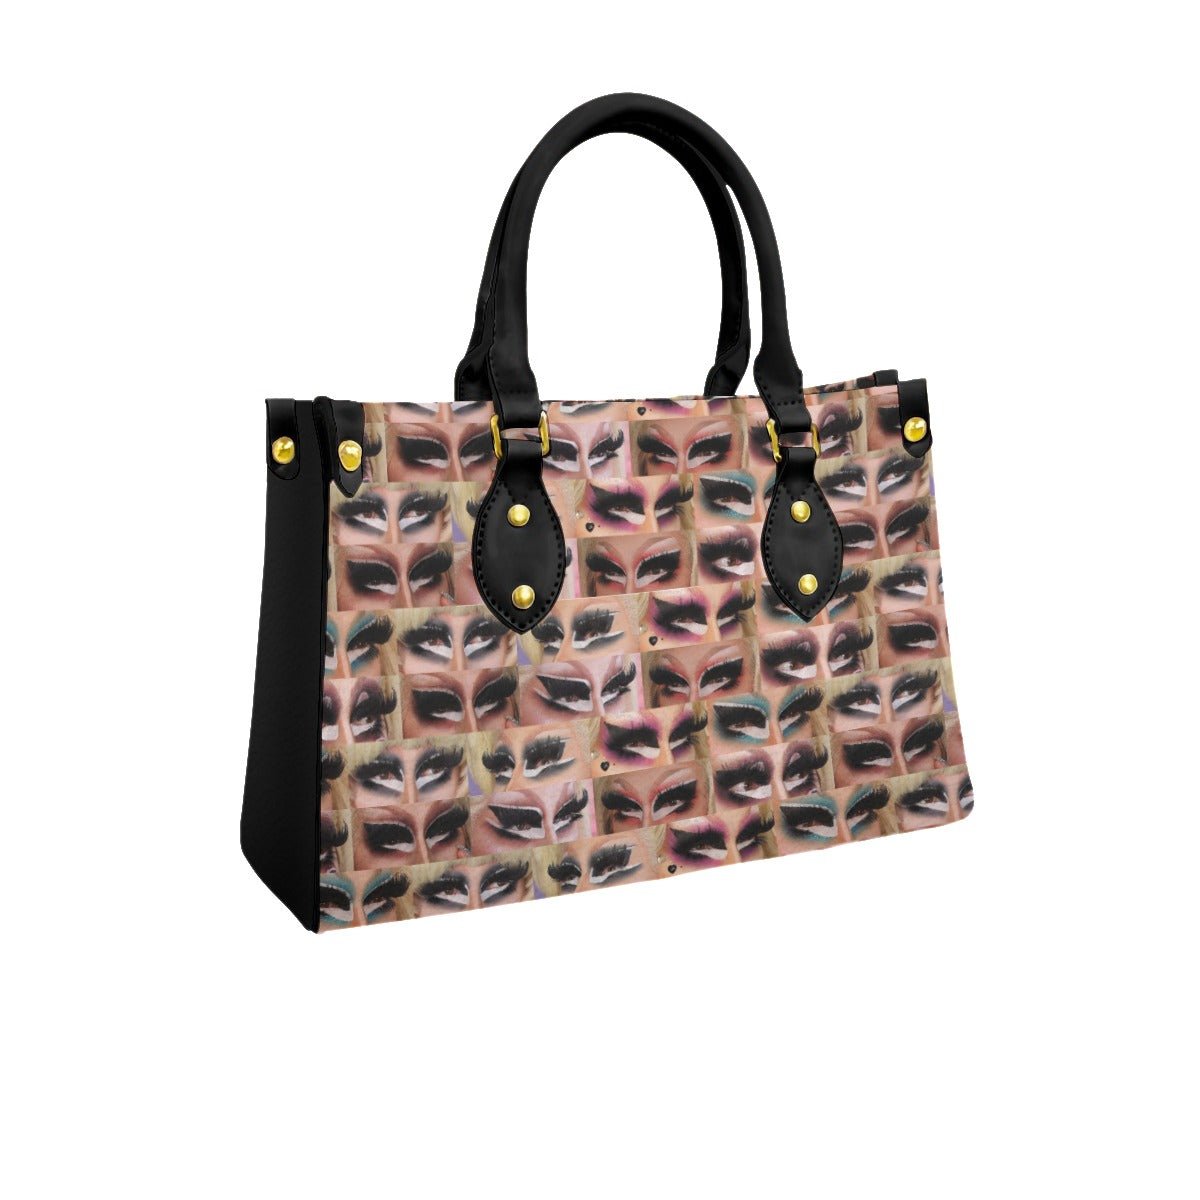 Women's Tote Bag With Black Handle - dragqueenmerch